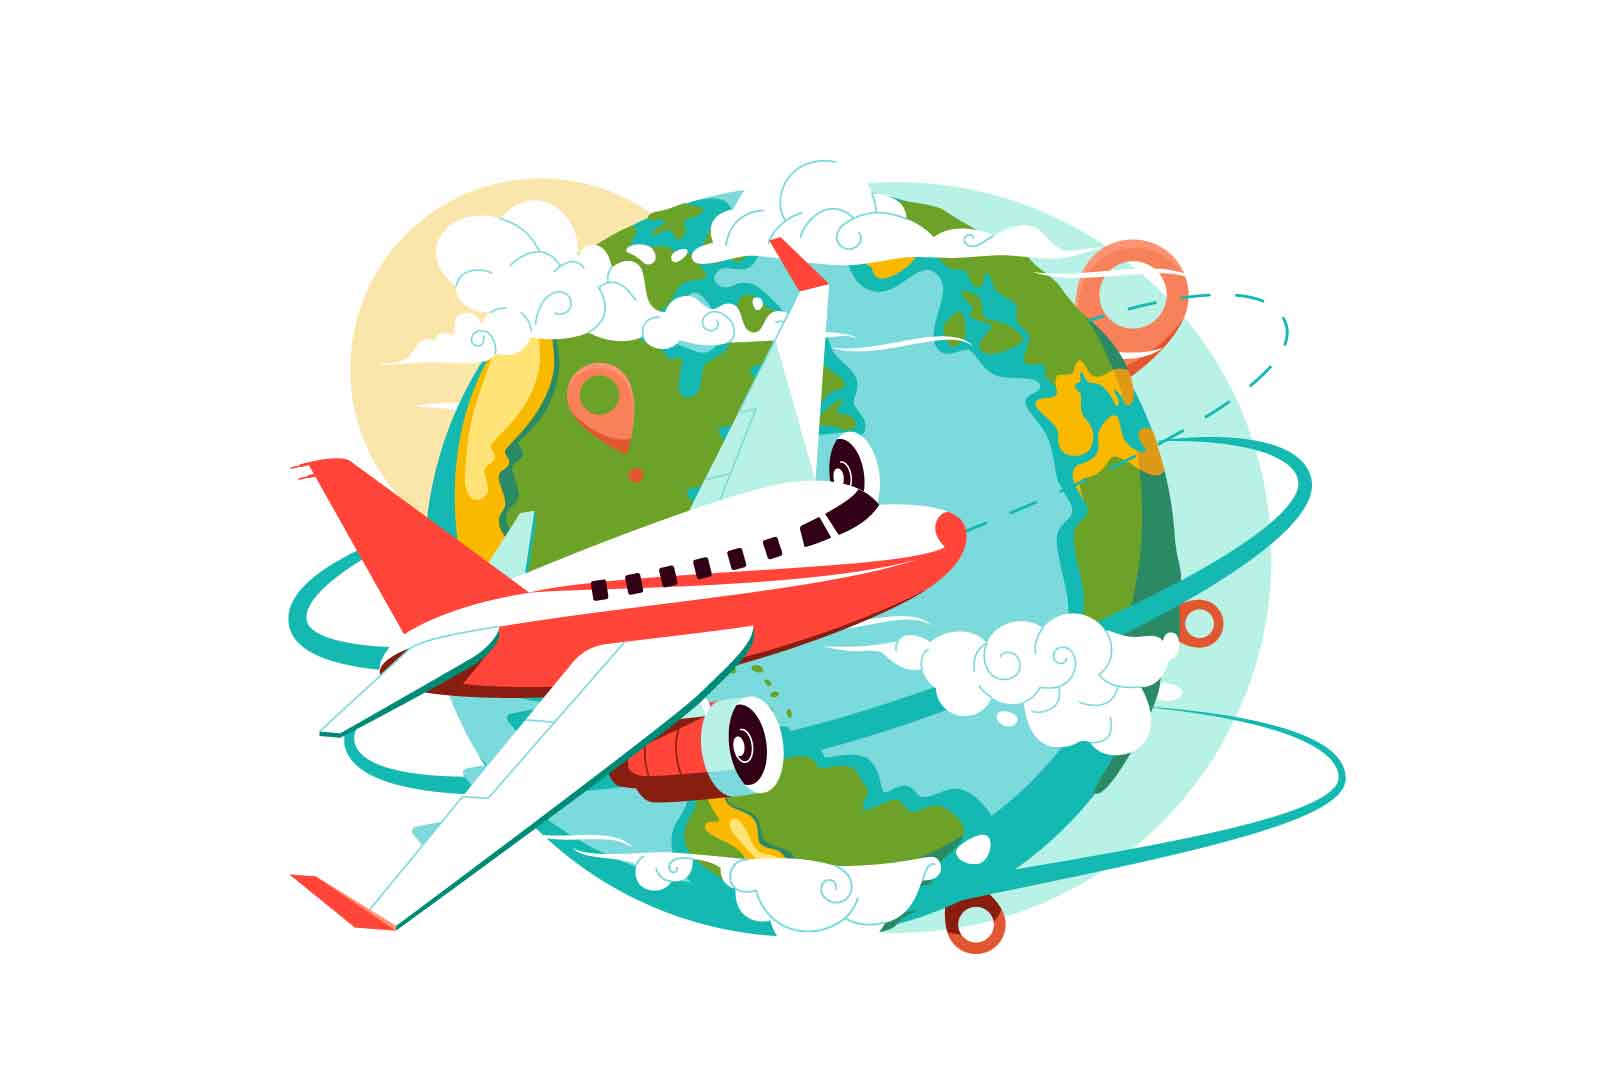 Airplane fly around world globe, explore planet vector illustration. Plane with passengers flat style. Travelling, adventure, trip concept